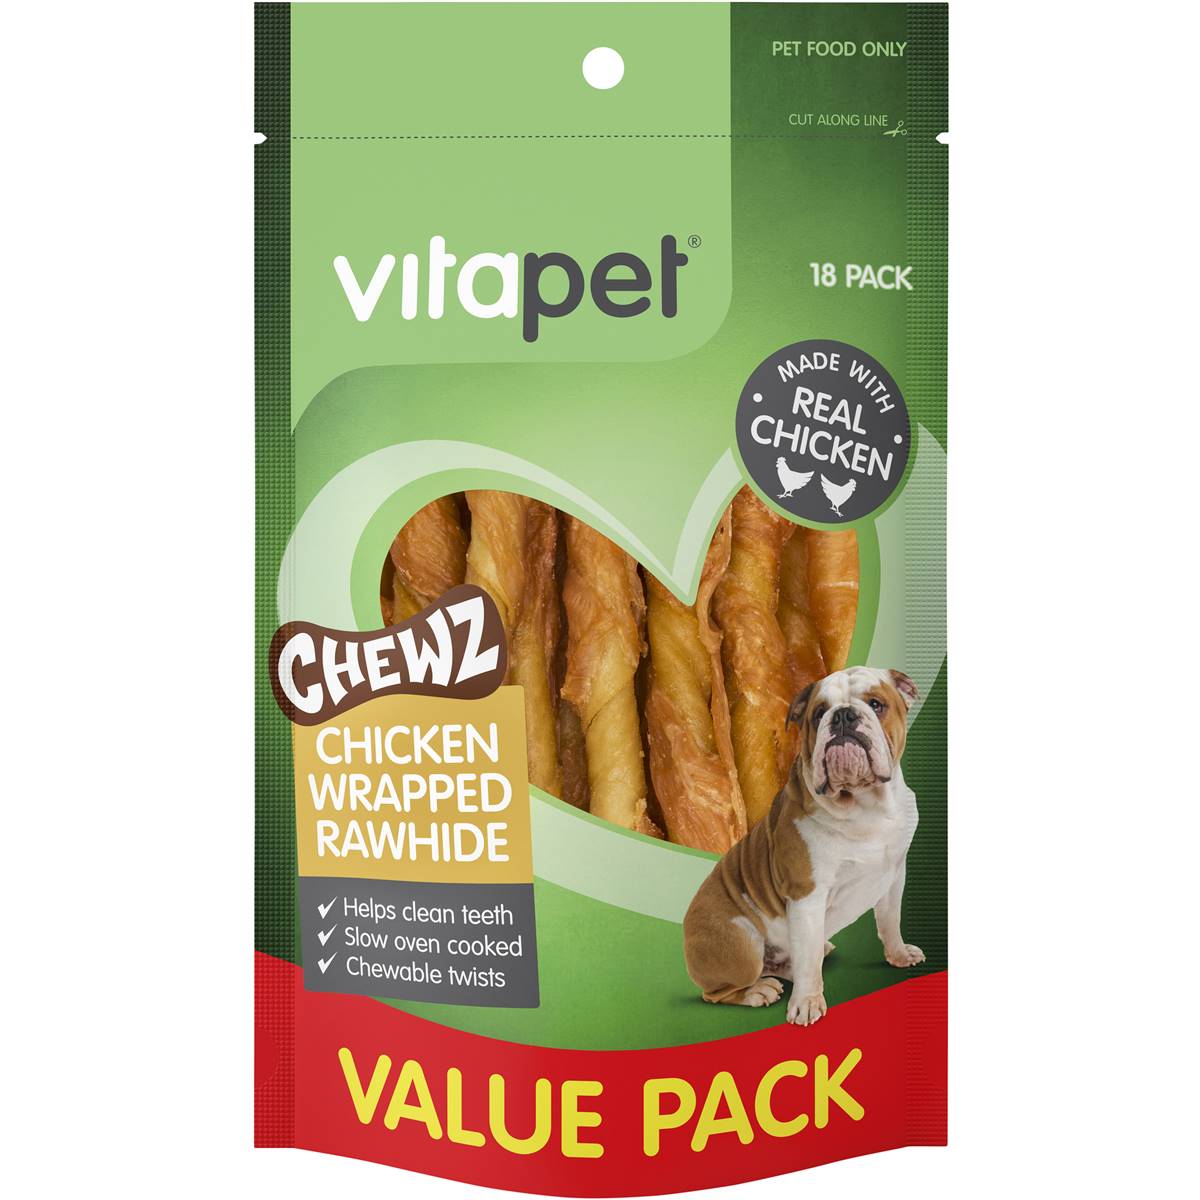 Vitapet Chewz Chicken Wrapped Rawhide Dog Food 18 Pack